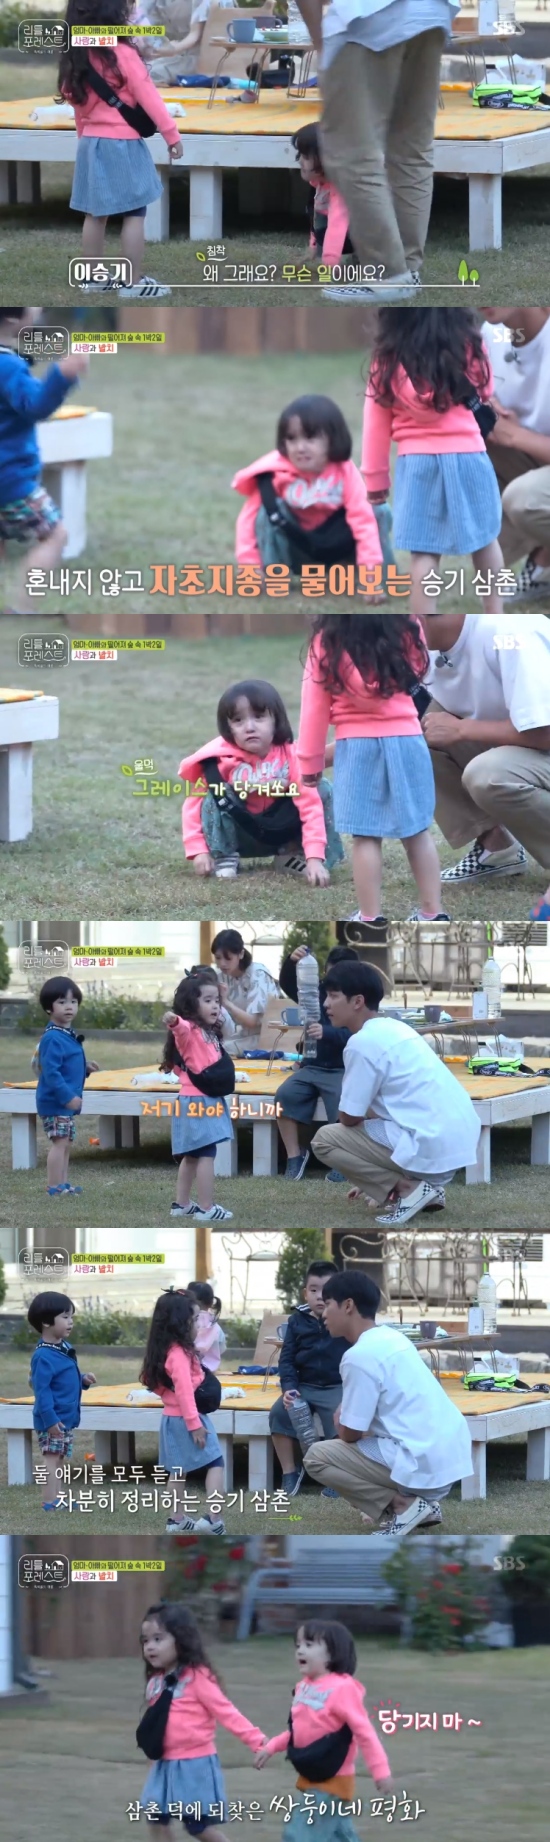 Singer Lee Seung-gi-gi-gi-gi-gi-gi Gi, gag woman Park Na-rae, actor Lee Seo Jin and Jung So Min gradually developed by communicating with children.In SBS Little Forest broadcast on the 19th, Lee Seung-gi-gi-gi-gi-gi-gi Gi, Park Na-rae, Lee Seo Jin and Jung So Min took care of the children in the forest for one night and two days.On this day, Lee Seung-gi-gi-gi-gi-gi-gi Gi made a rocking leg for the children.Jung So-min and Park Na-rae helped Lee Seung-gi-gi-gi-gi-gi-gi-gi to play with the children, and when a child said that he would go to the bathroom, all the children wanted to go to the bathroom.At this time, Ms. Brook said, We have been outside before. Park Na-rae took Miss Grace to the remote forest.However, Grace said, I will do it in the toilet, and Lee Seo-jin came to the private toilet of Grace in the hostel.Park Na-rae let the toilet in the forest, but Grace did not urinate, and Park Na-rae, who was embarrassed, explained the cause to Jung So-min.As soon as Jung heard the story, she noticed that Miss Grace had not urinated because of her shameful heart. So Park said,  (Graces heart) Aunt did not know.Im sorry, she said.Lee also ran to Miss Brook, who cried, and asked why she cried.Ms Brooke said, Grace pulled, and Lee Seung-gi-gi-gi-gi-gi-gi-gi asked Miss Grace, Grace, why did you pull?I have to come over there, said Grace, and Lee Seung-gi-gi-gi-gi-gi-gi-gi explained, I wonder if Brooke would like to go. Ask him, Ill go with you.Ms Grace asked, Will you come with me? and Ms Brooke walked with Ms Grace, holding hands, saying yes.Ms Brooke said, Dont pull, and Lee smiled, saying, Its so cute.In particular, unlike the blunt image that Lee Seo-jin showed, he showed a friendly aspect every time he treated the children, and Jung So-min communicated with the children in a friendly manner and created a cheerful atmosphere.Photo = SBS Broadcasting Screen